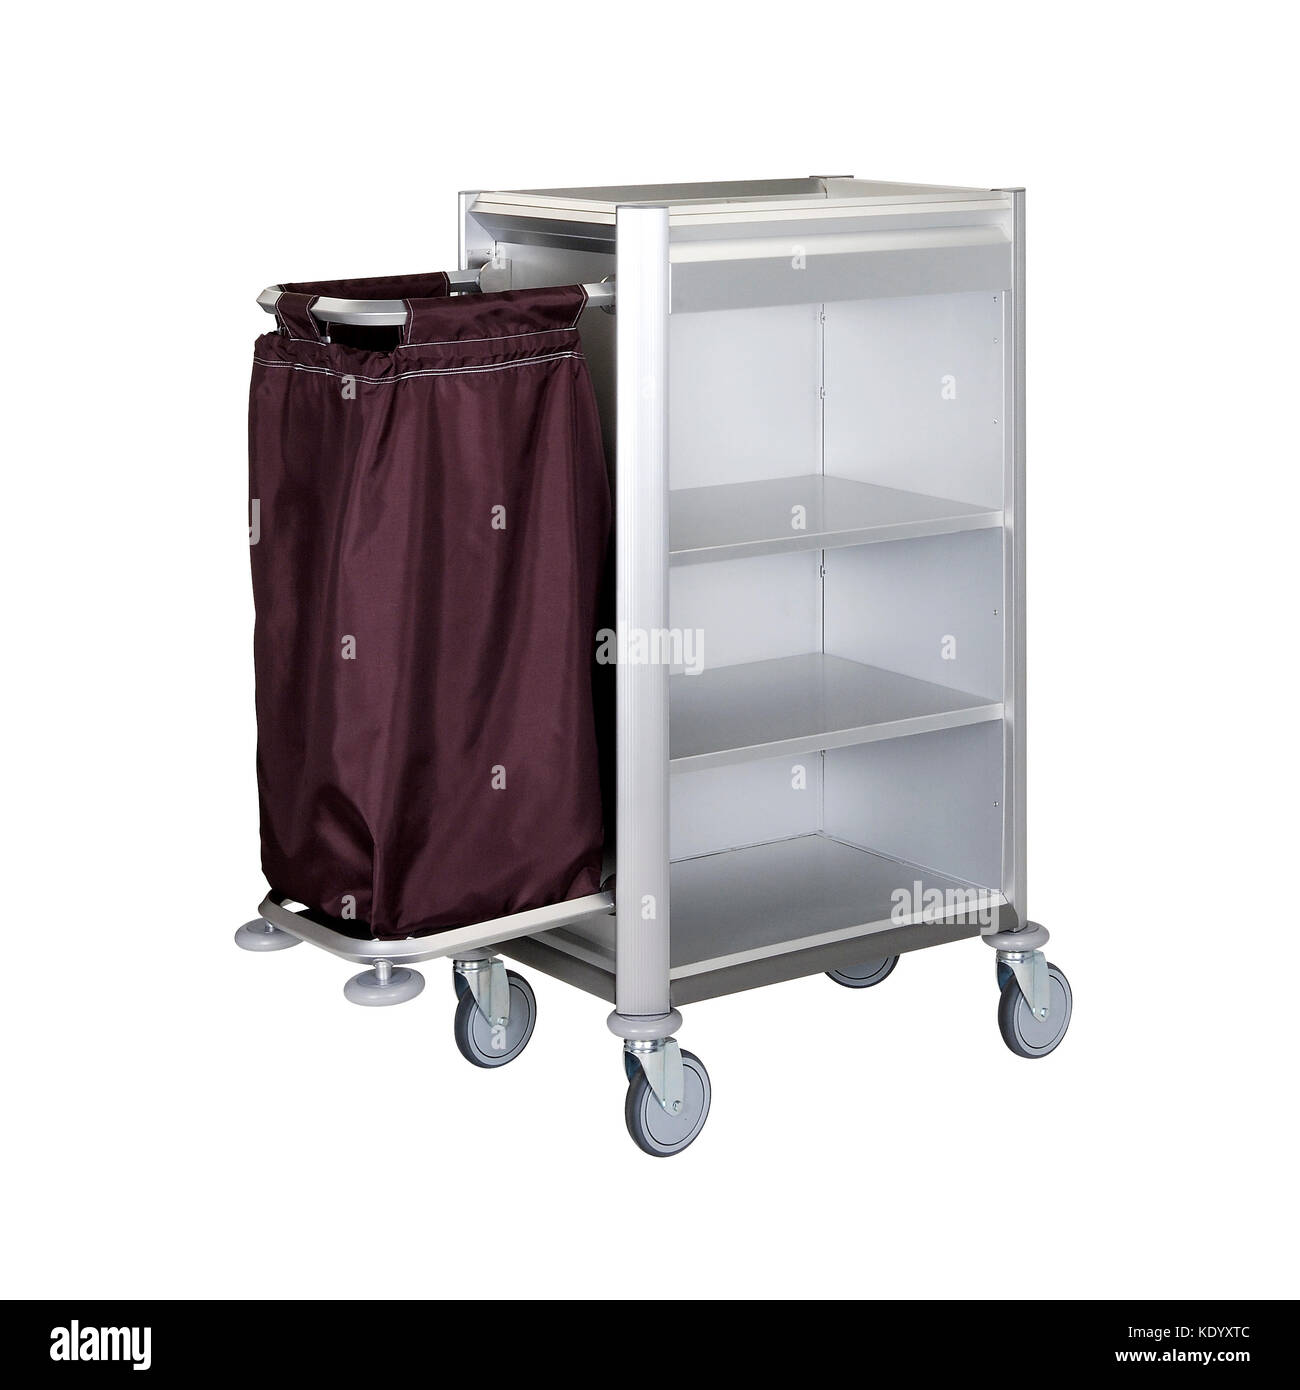 https://c8.alamy.com/comp/KDYXTC/the-hotel-cleaning-tool-cart-isolated-with-path-KDYXTC.jpg